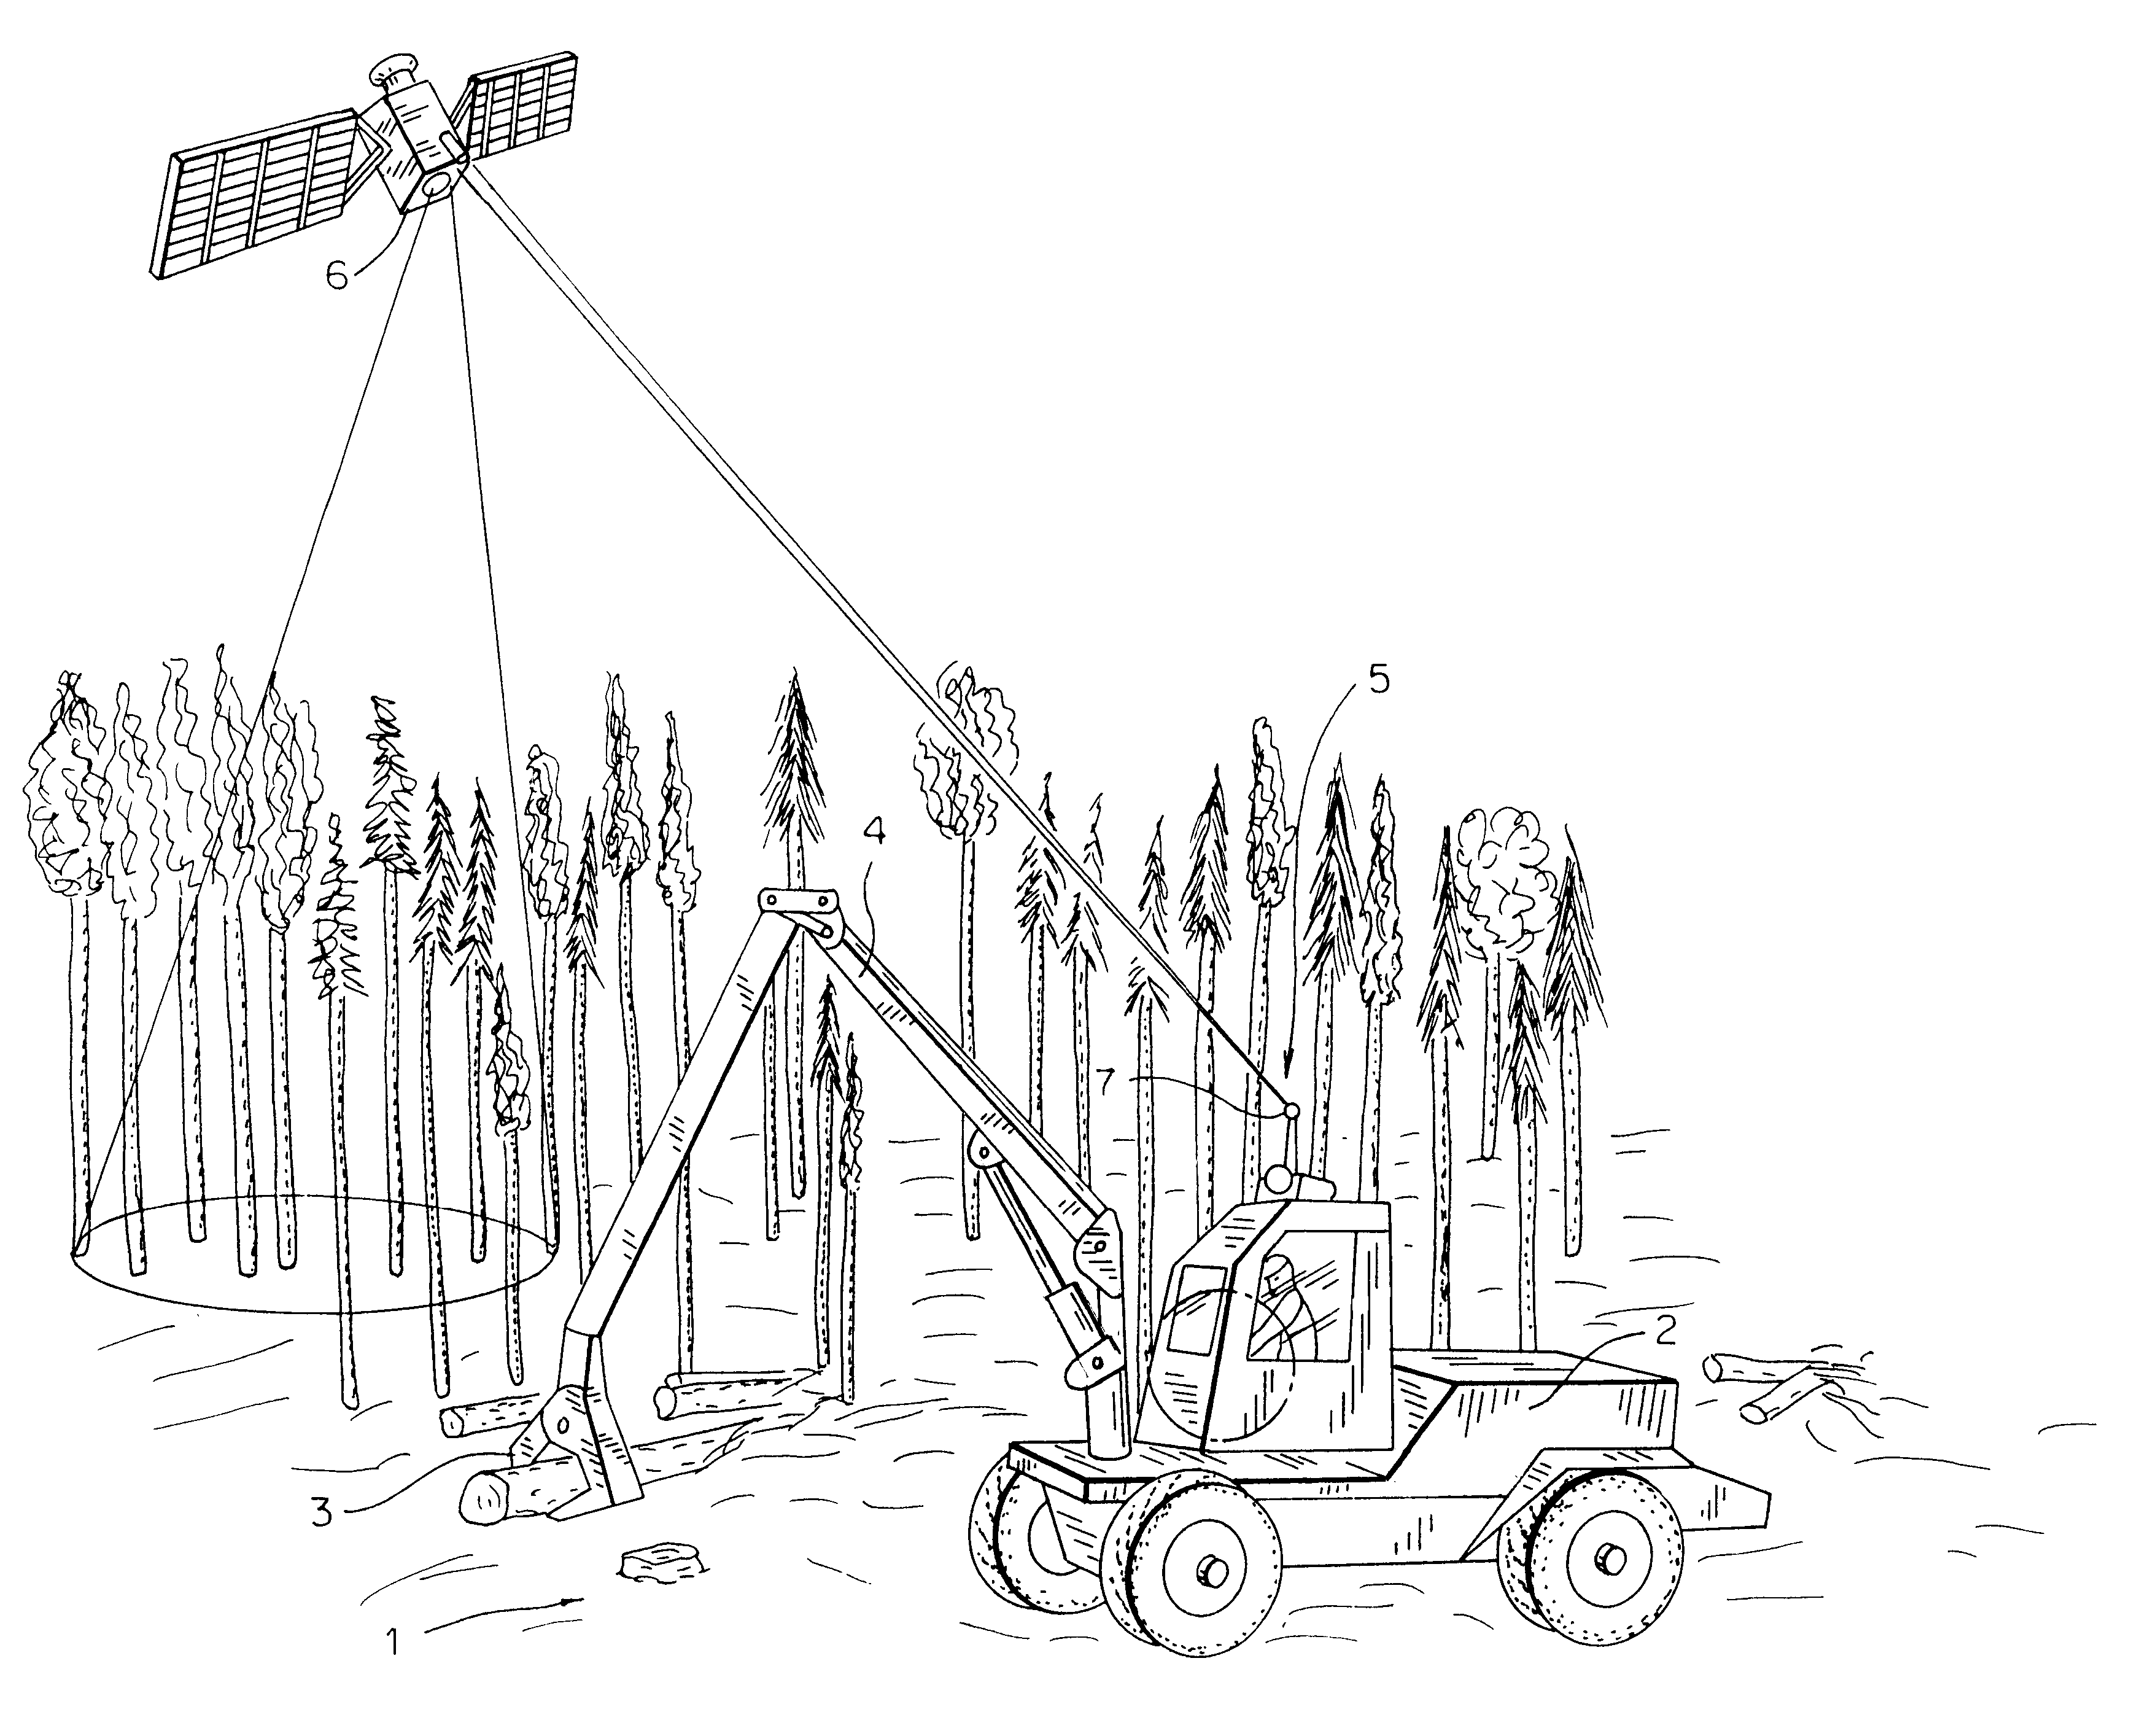 Method for timber harvesting and system for forestry